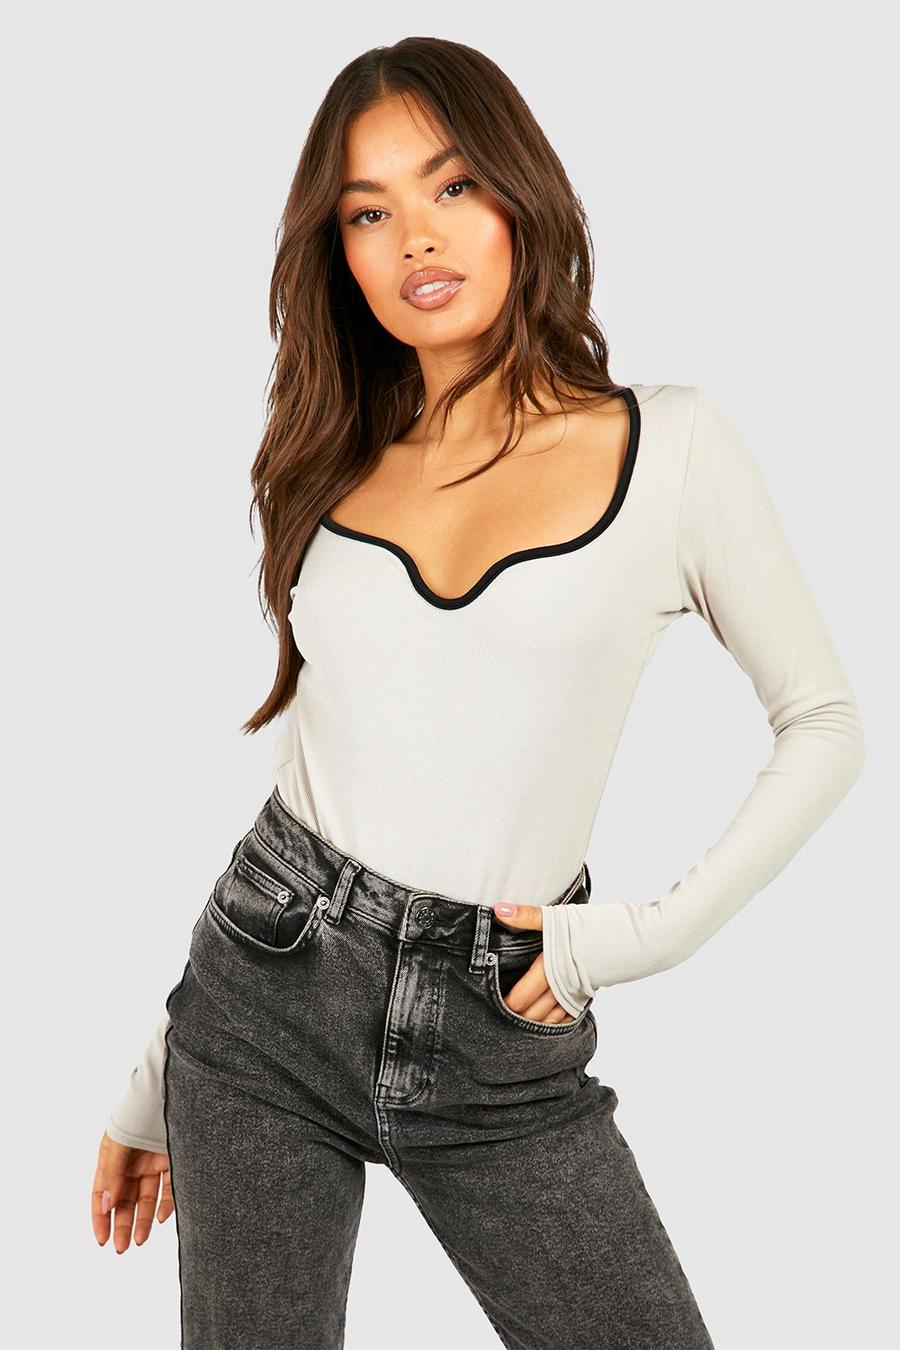 Women's Long Sleeve Bodysuits: 100+ Items up to −70%